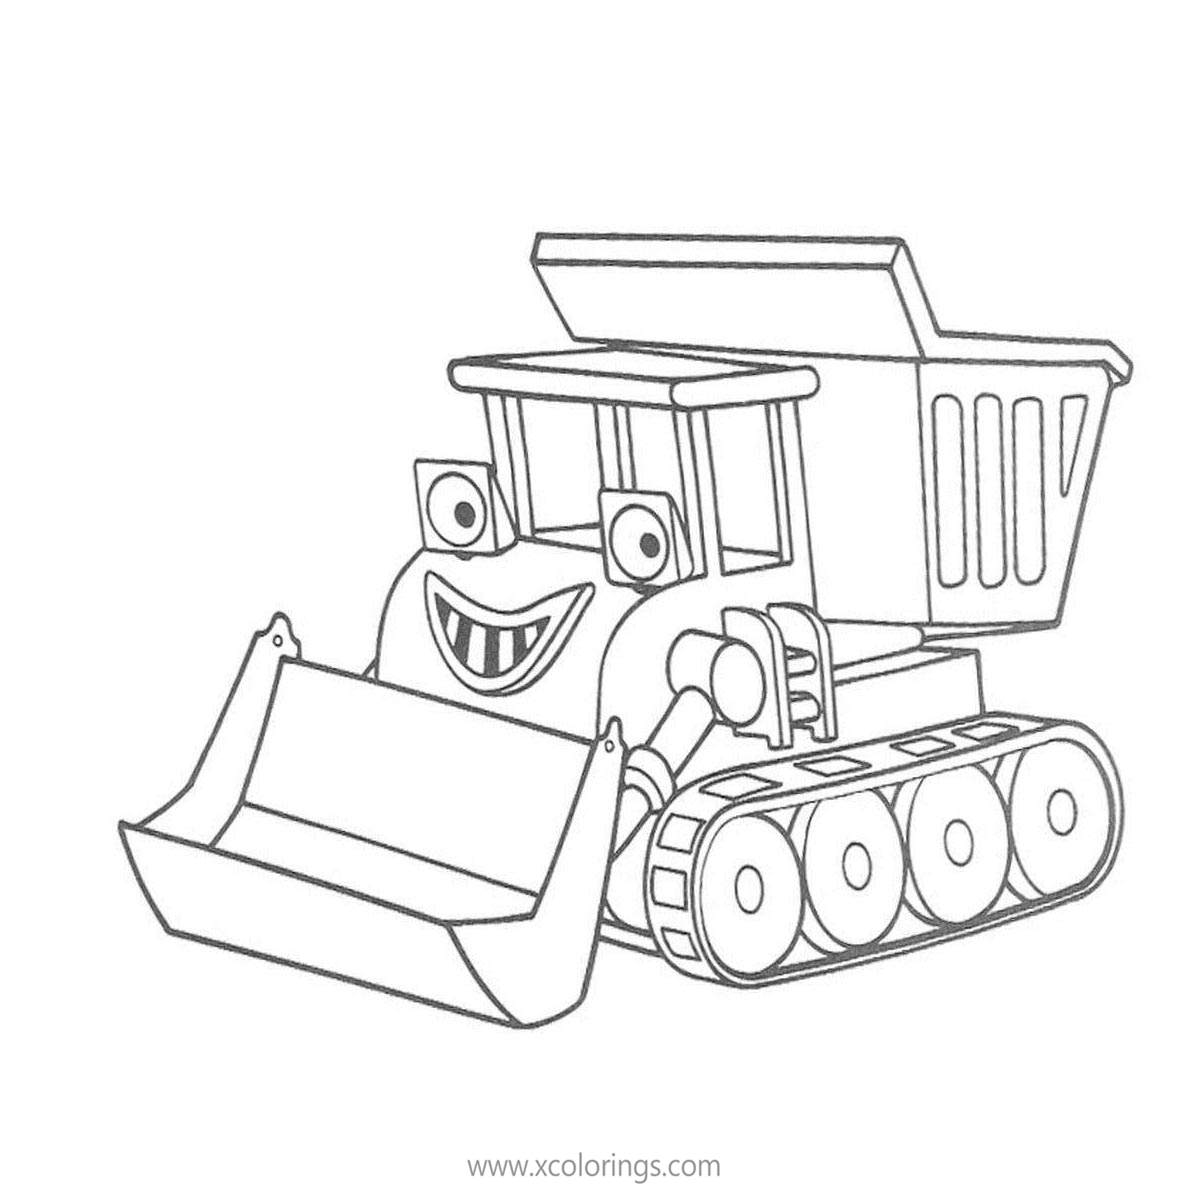 Free Bob the Builder Machines Coloring Pages Muck printable